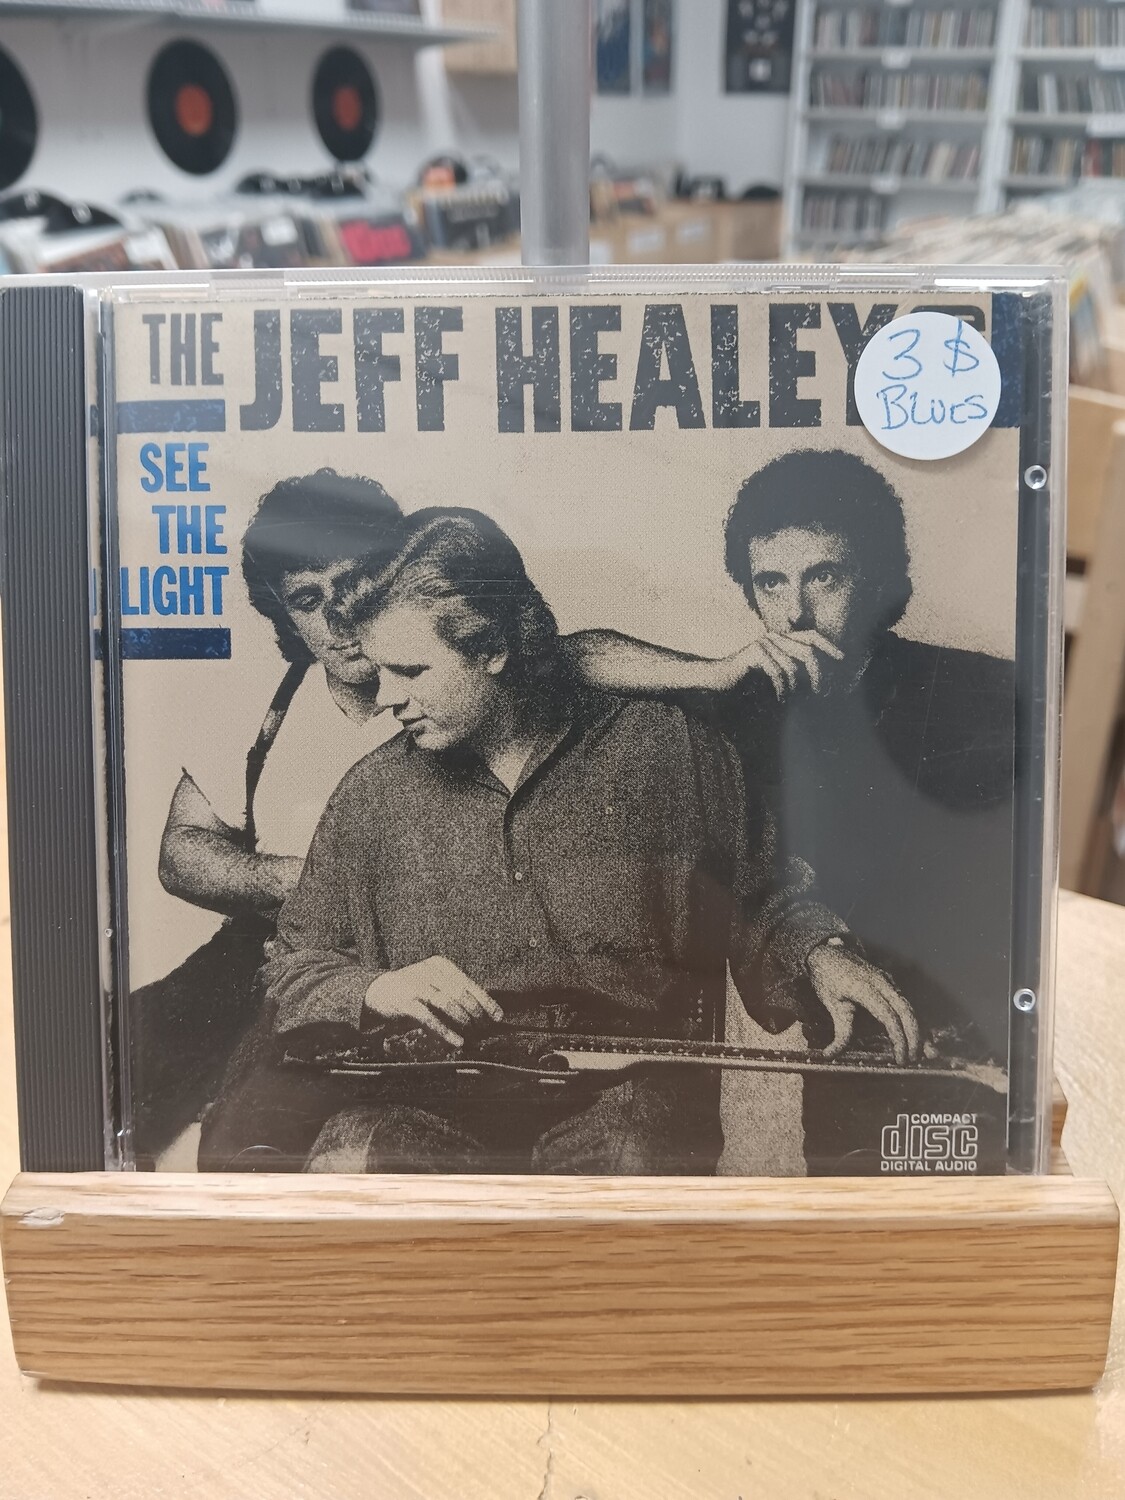 The Jeff Healey Band - See the light (CD)